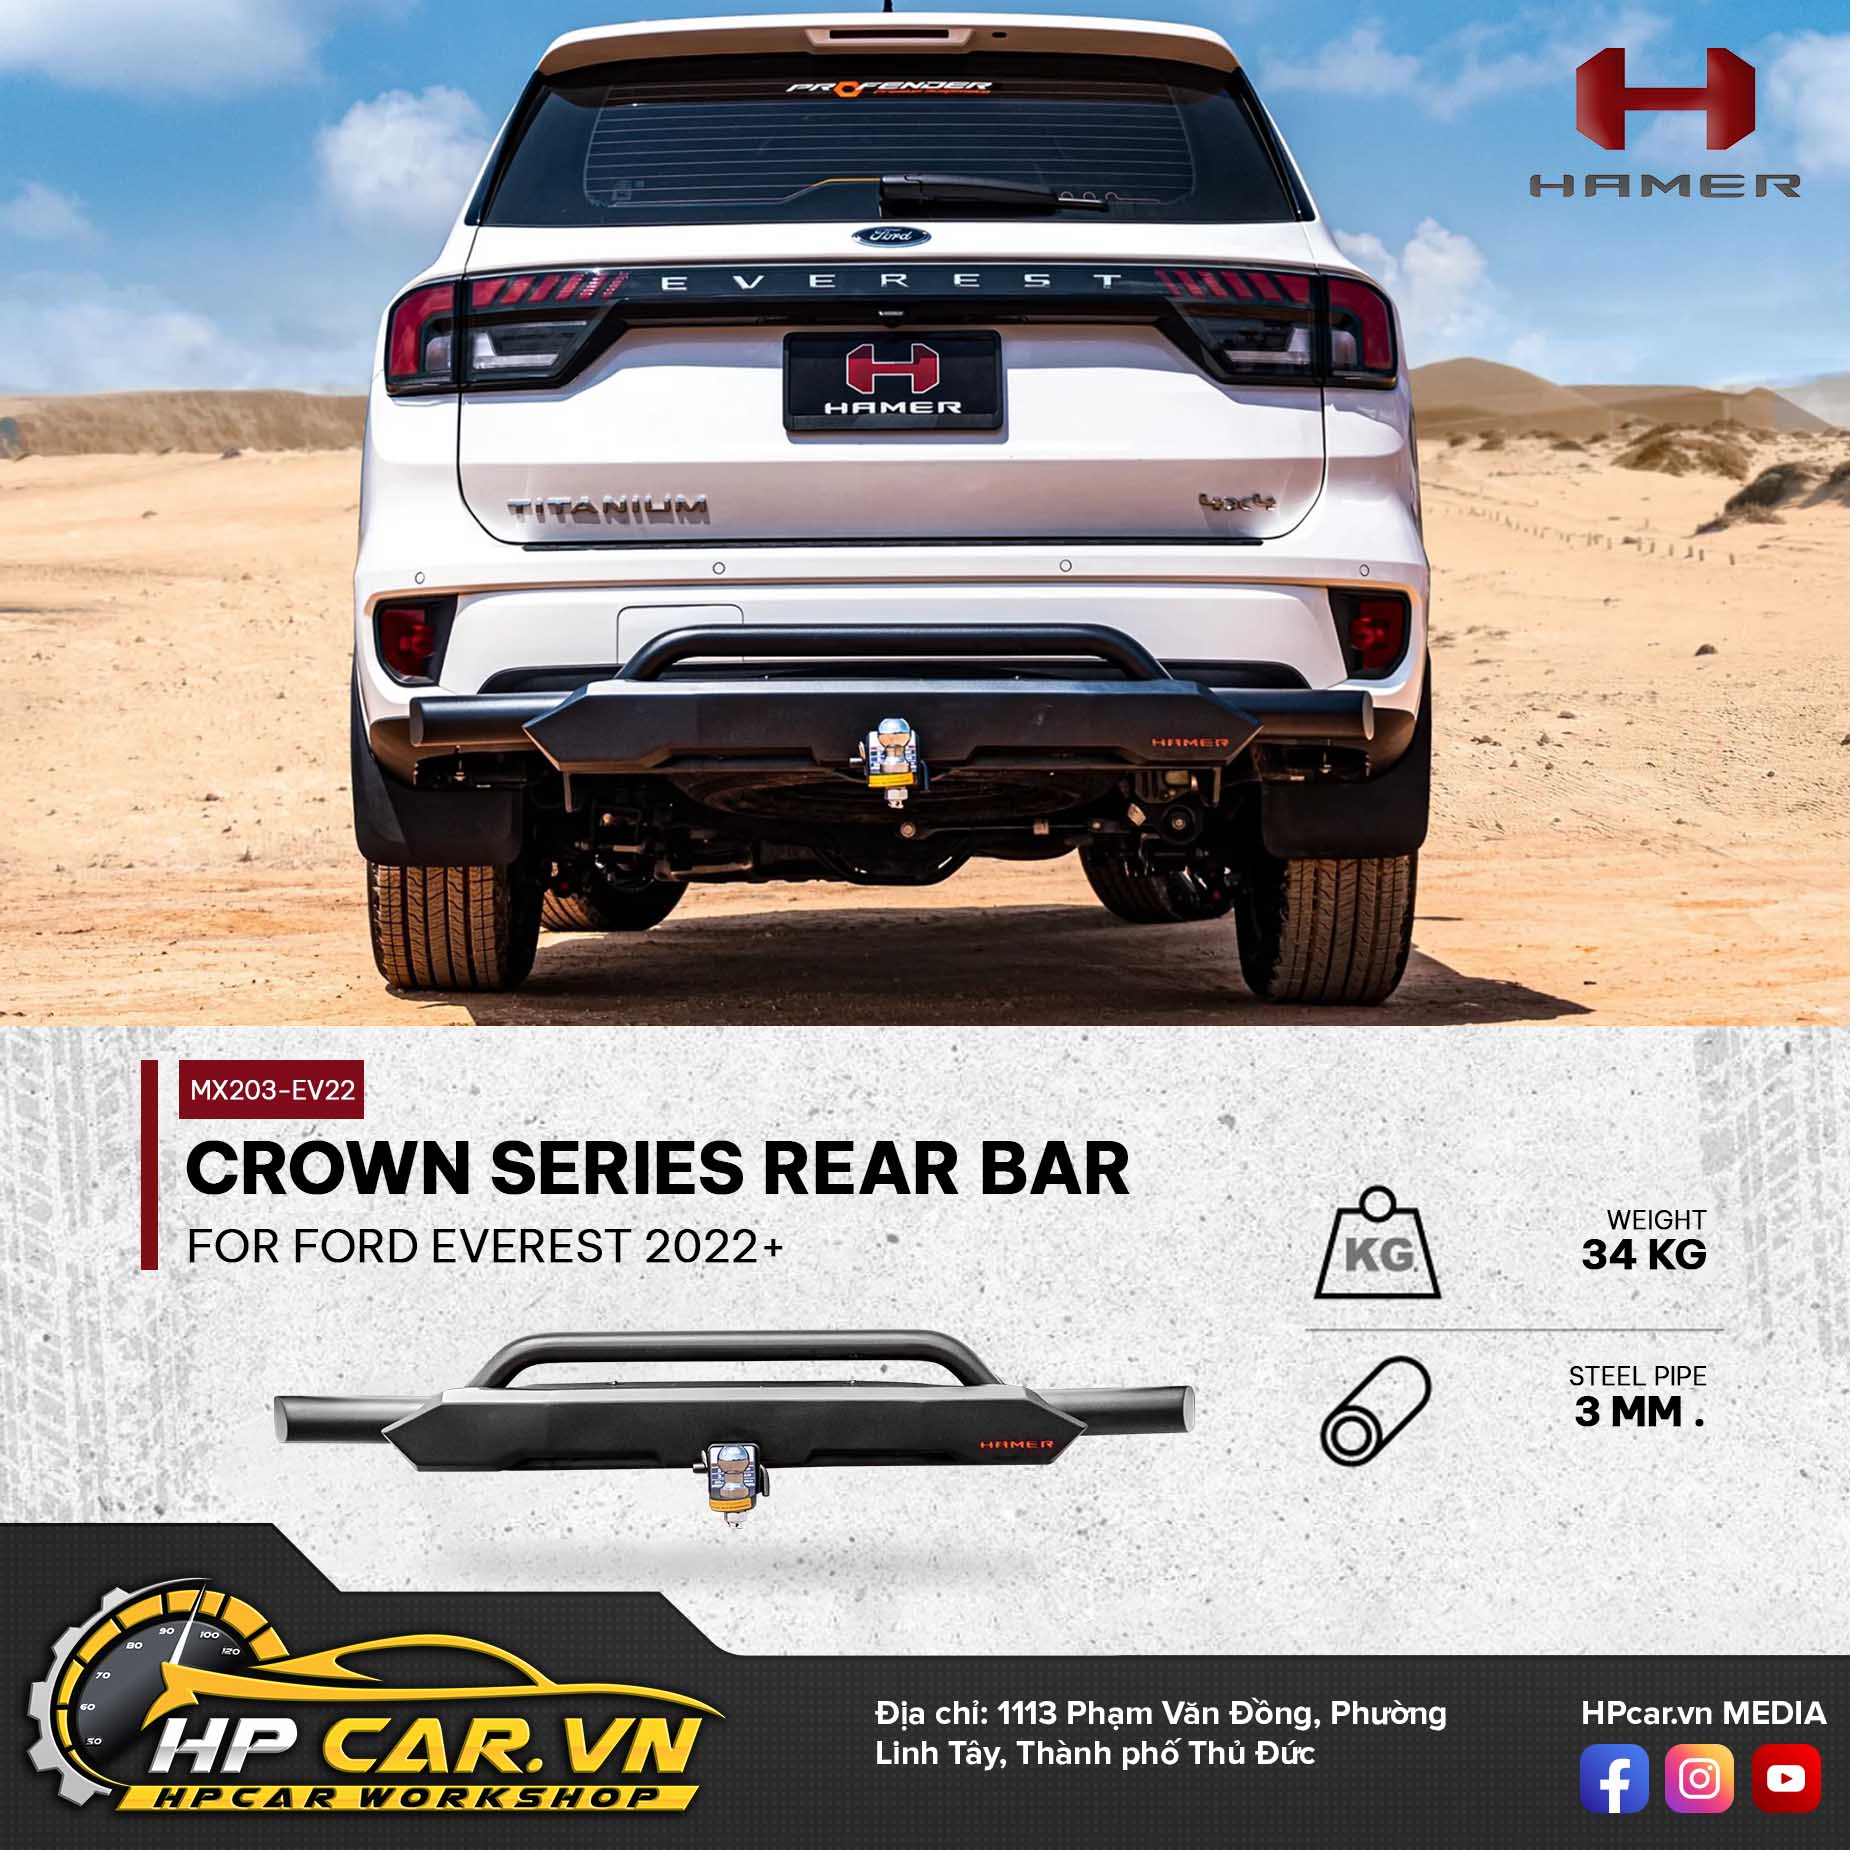 CROWN SERIES REAR BAR FOR FORD EVEREST 2022+